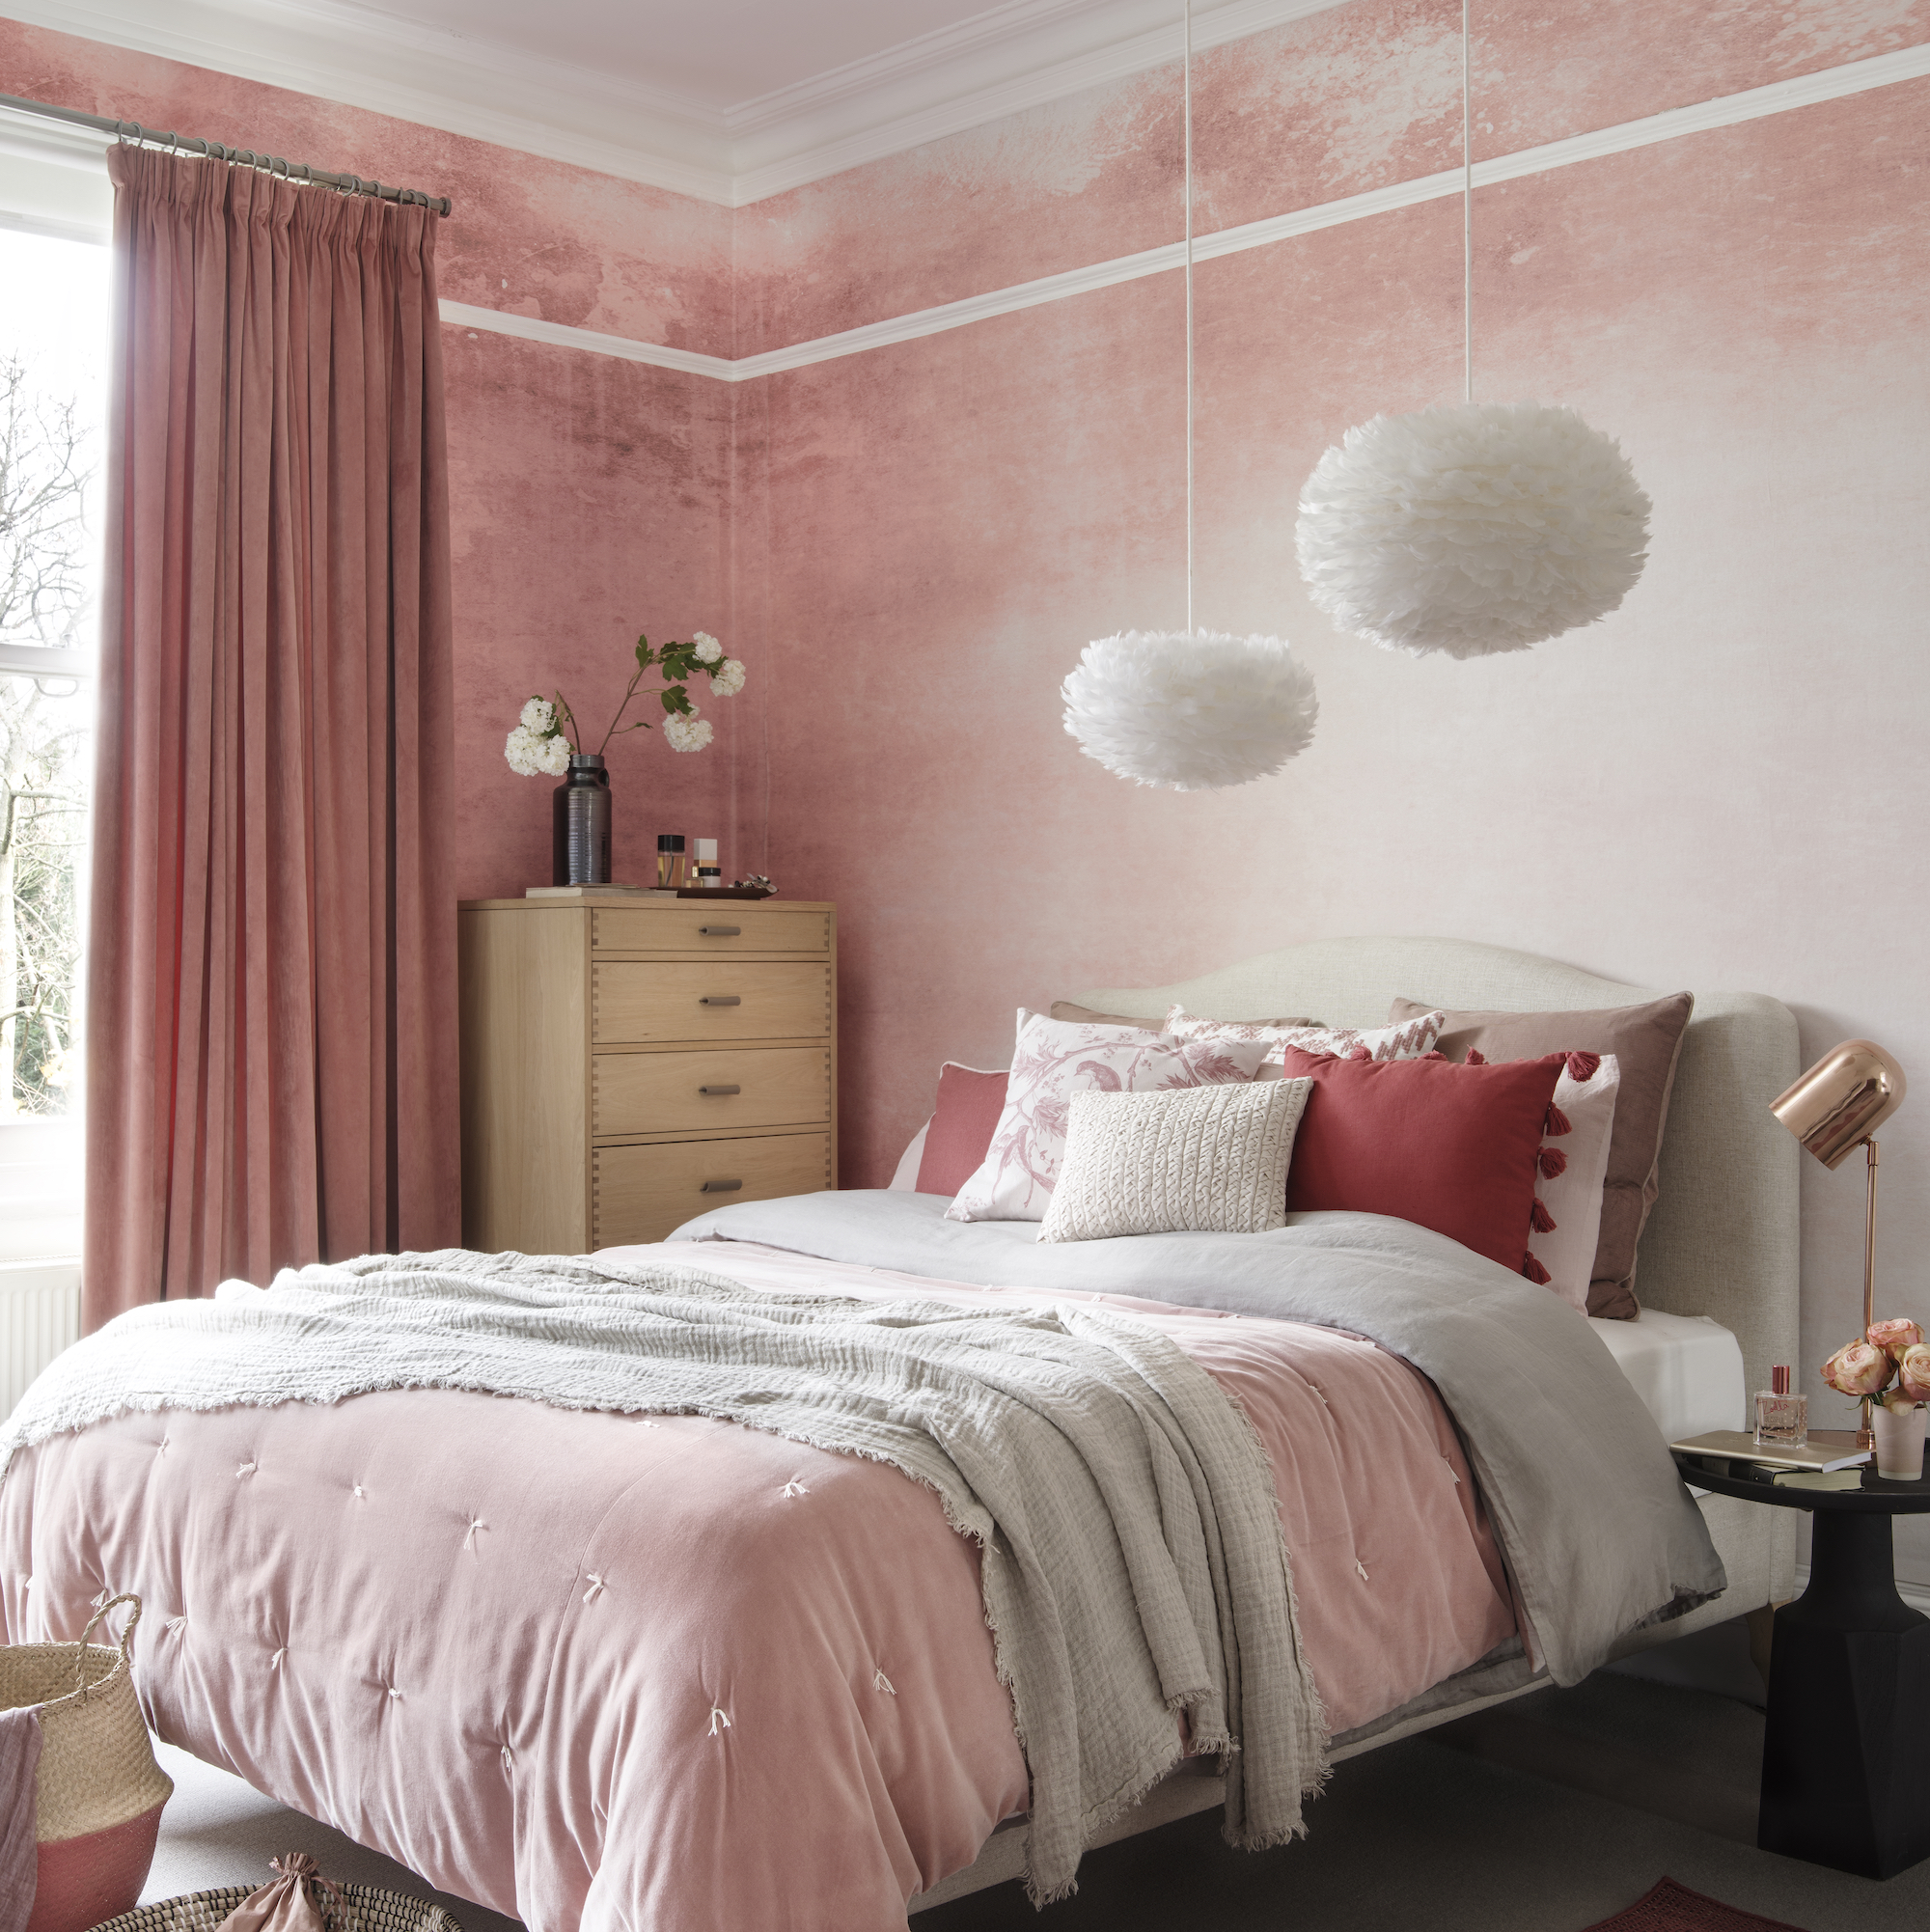 Pink bedroom with white lamps